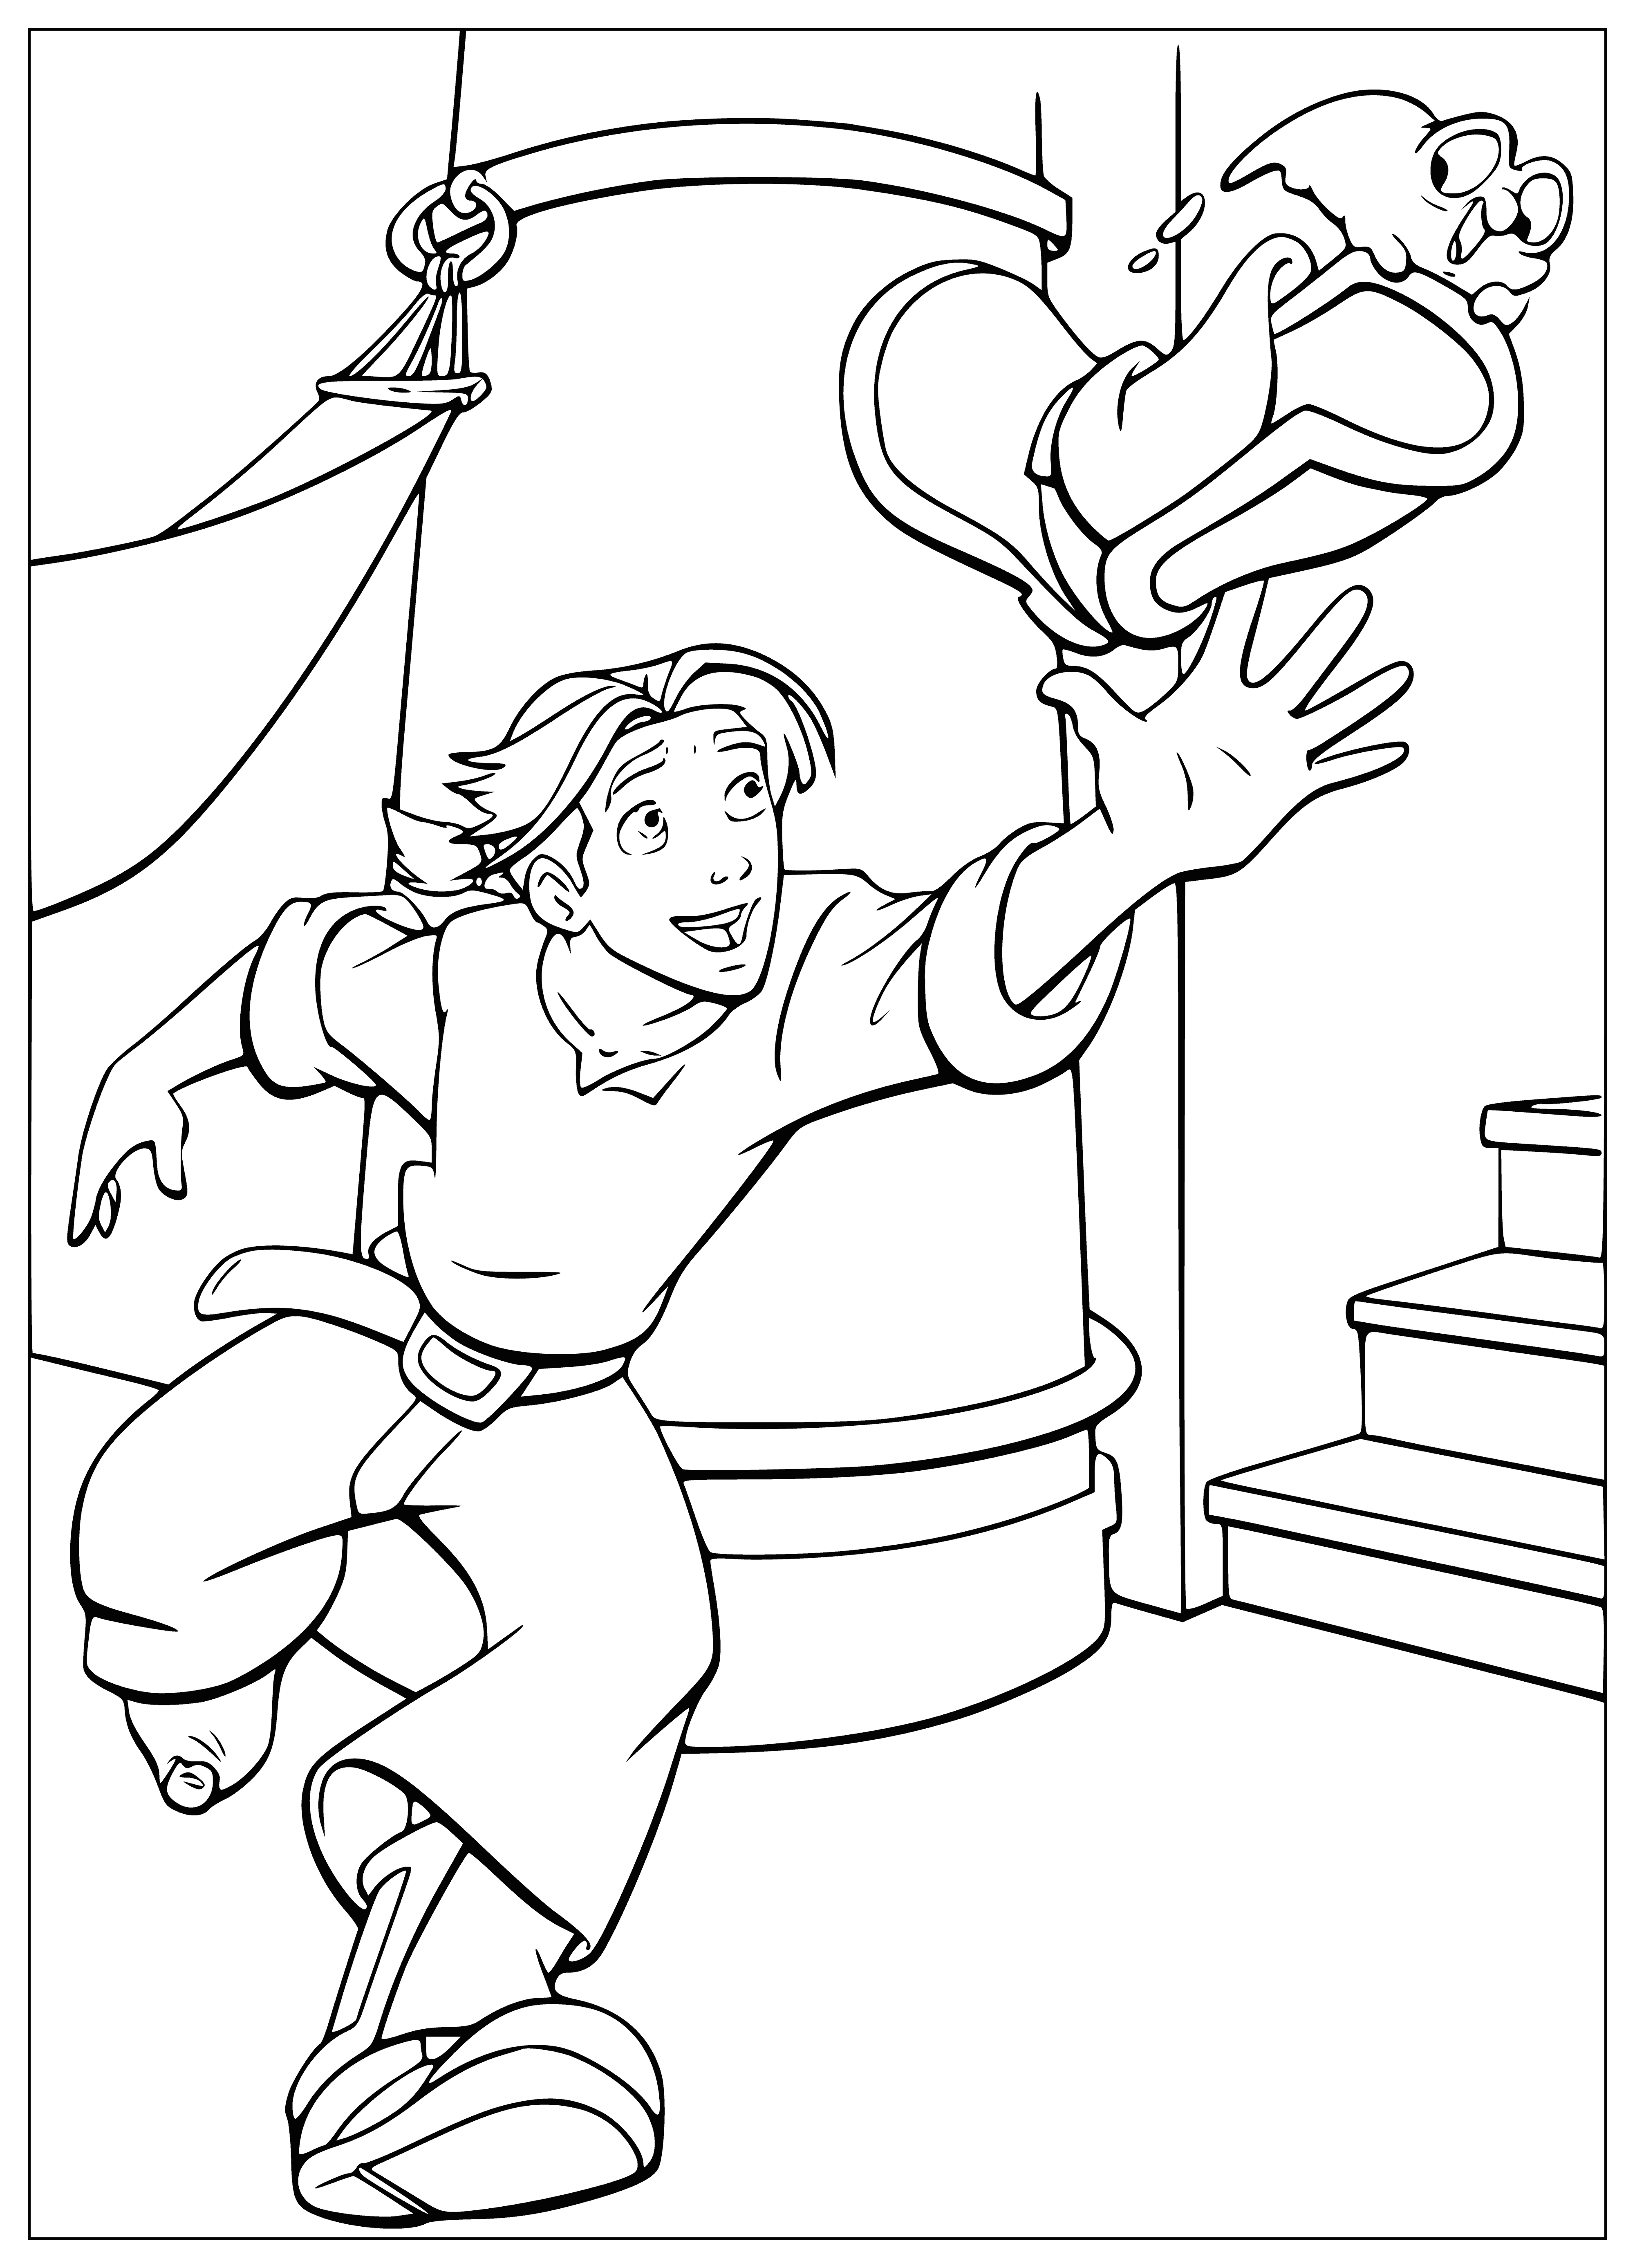 coloring page: Morph is a small, four-limbed alien in Treasure Planet, wearing a red vest & blue bandanna & standing on a treasure chest.